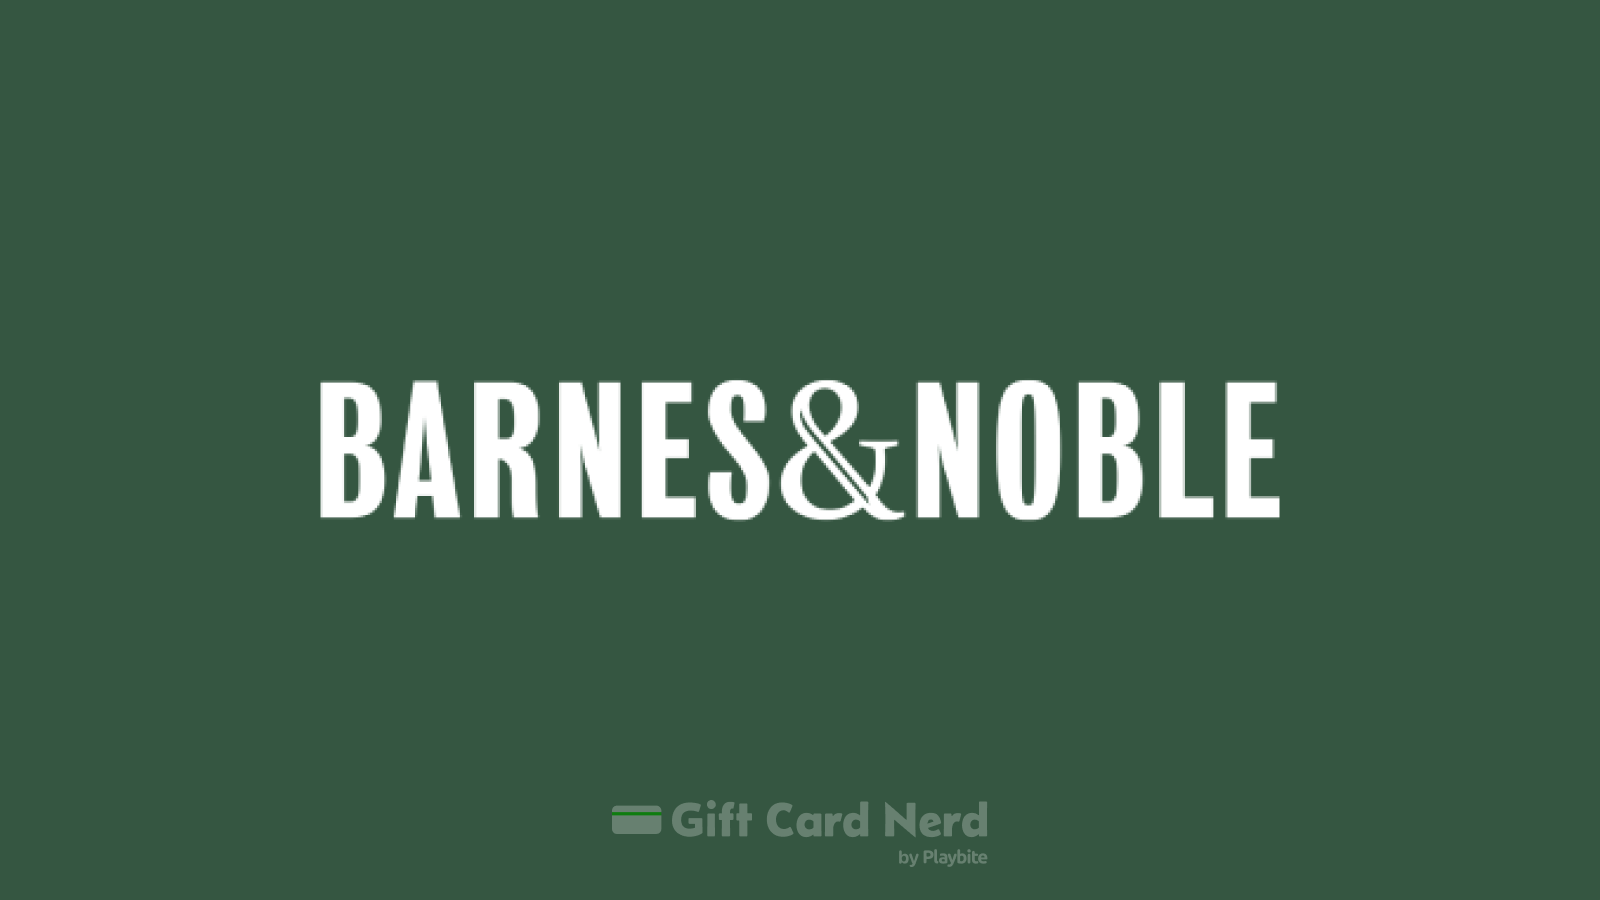 Can You Buy Barnes and Noble Gift Cards at Target?